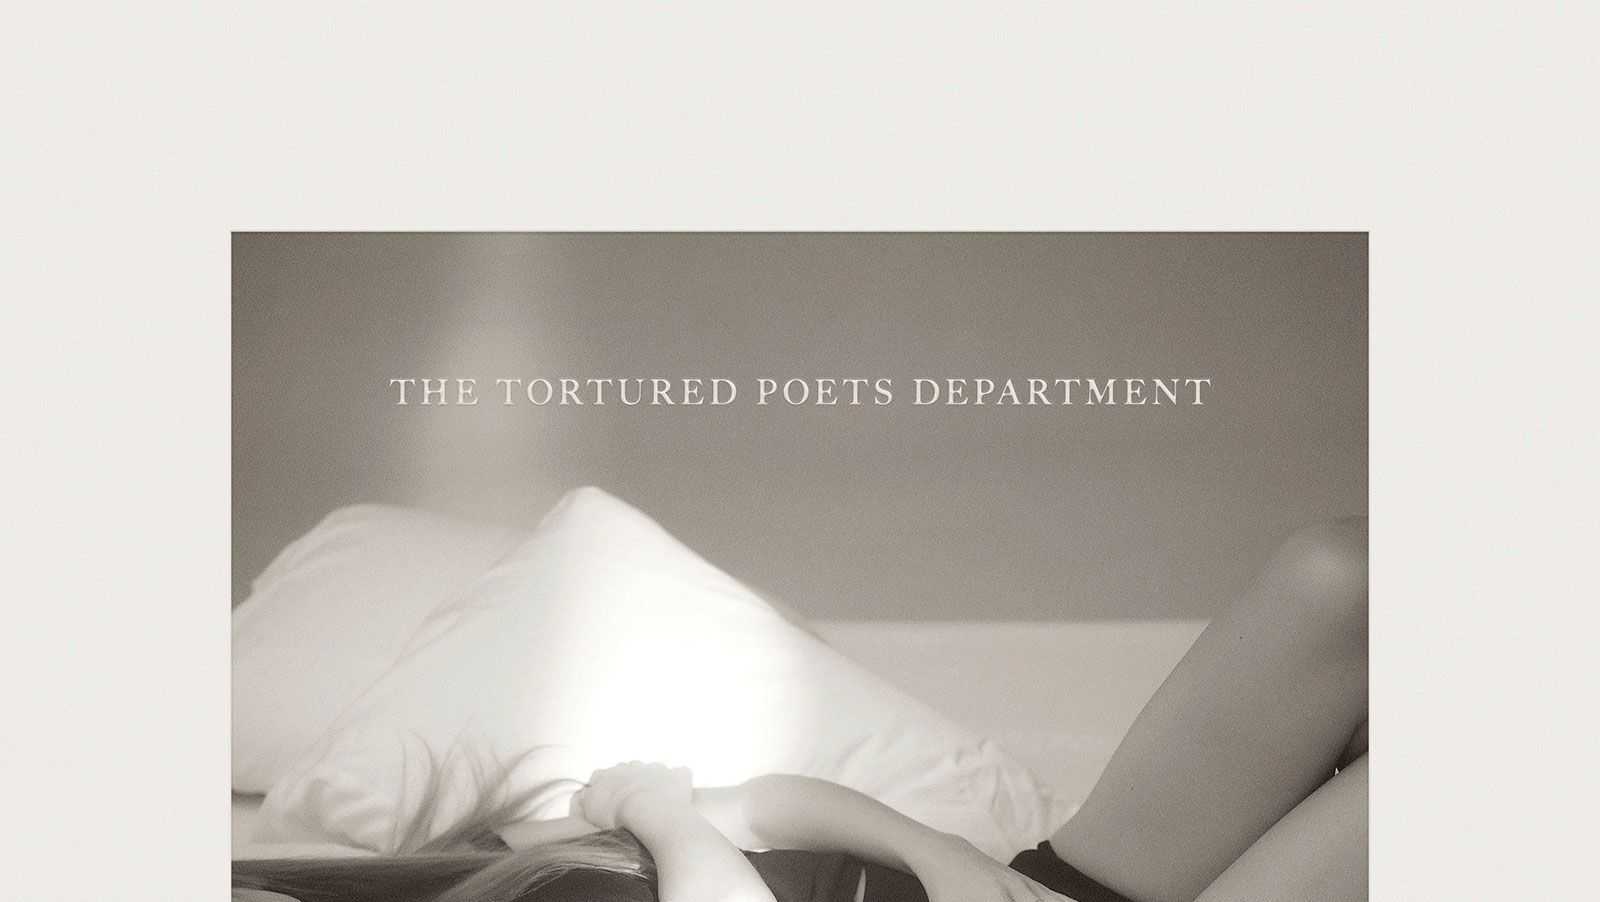 Taylor Swift The Tortured Poets Department hits No. 1, with songs claiming the top 14 spots